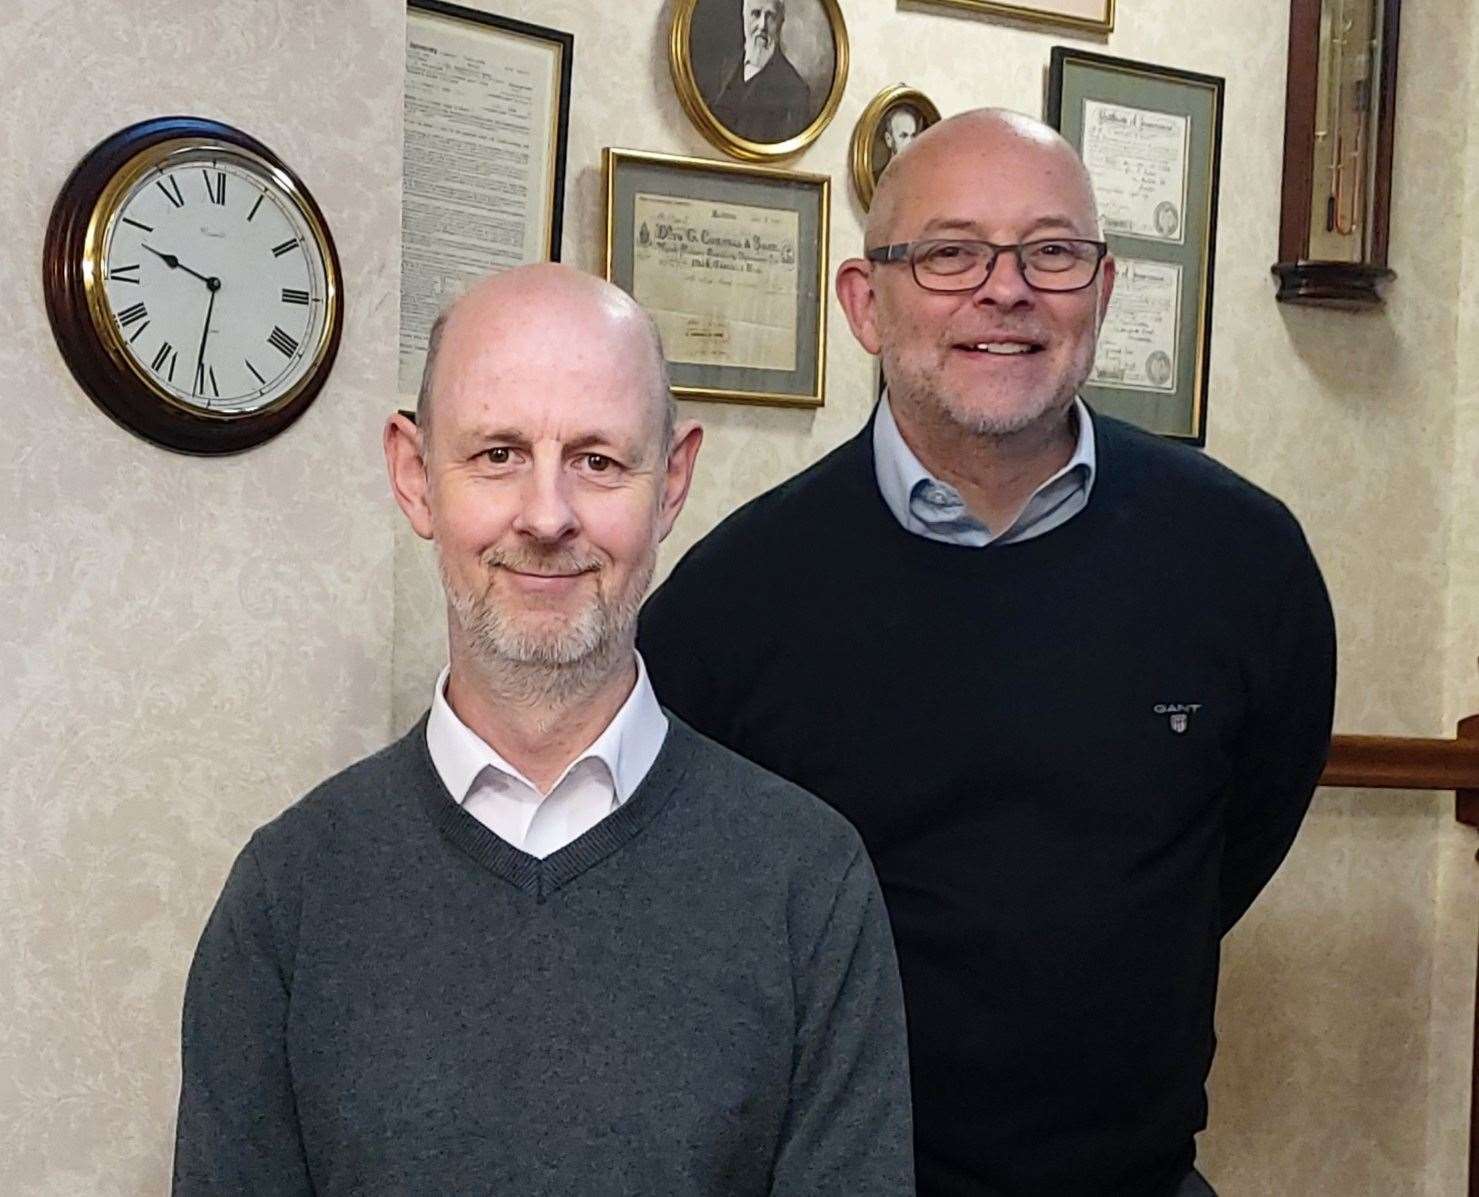 From left: Cornell jewellers owners Andrew Putley and Stewart Cook